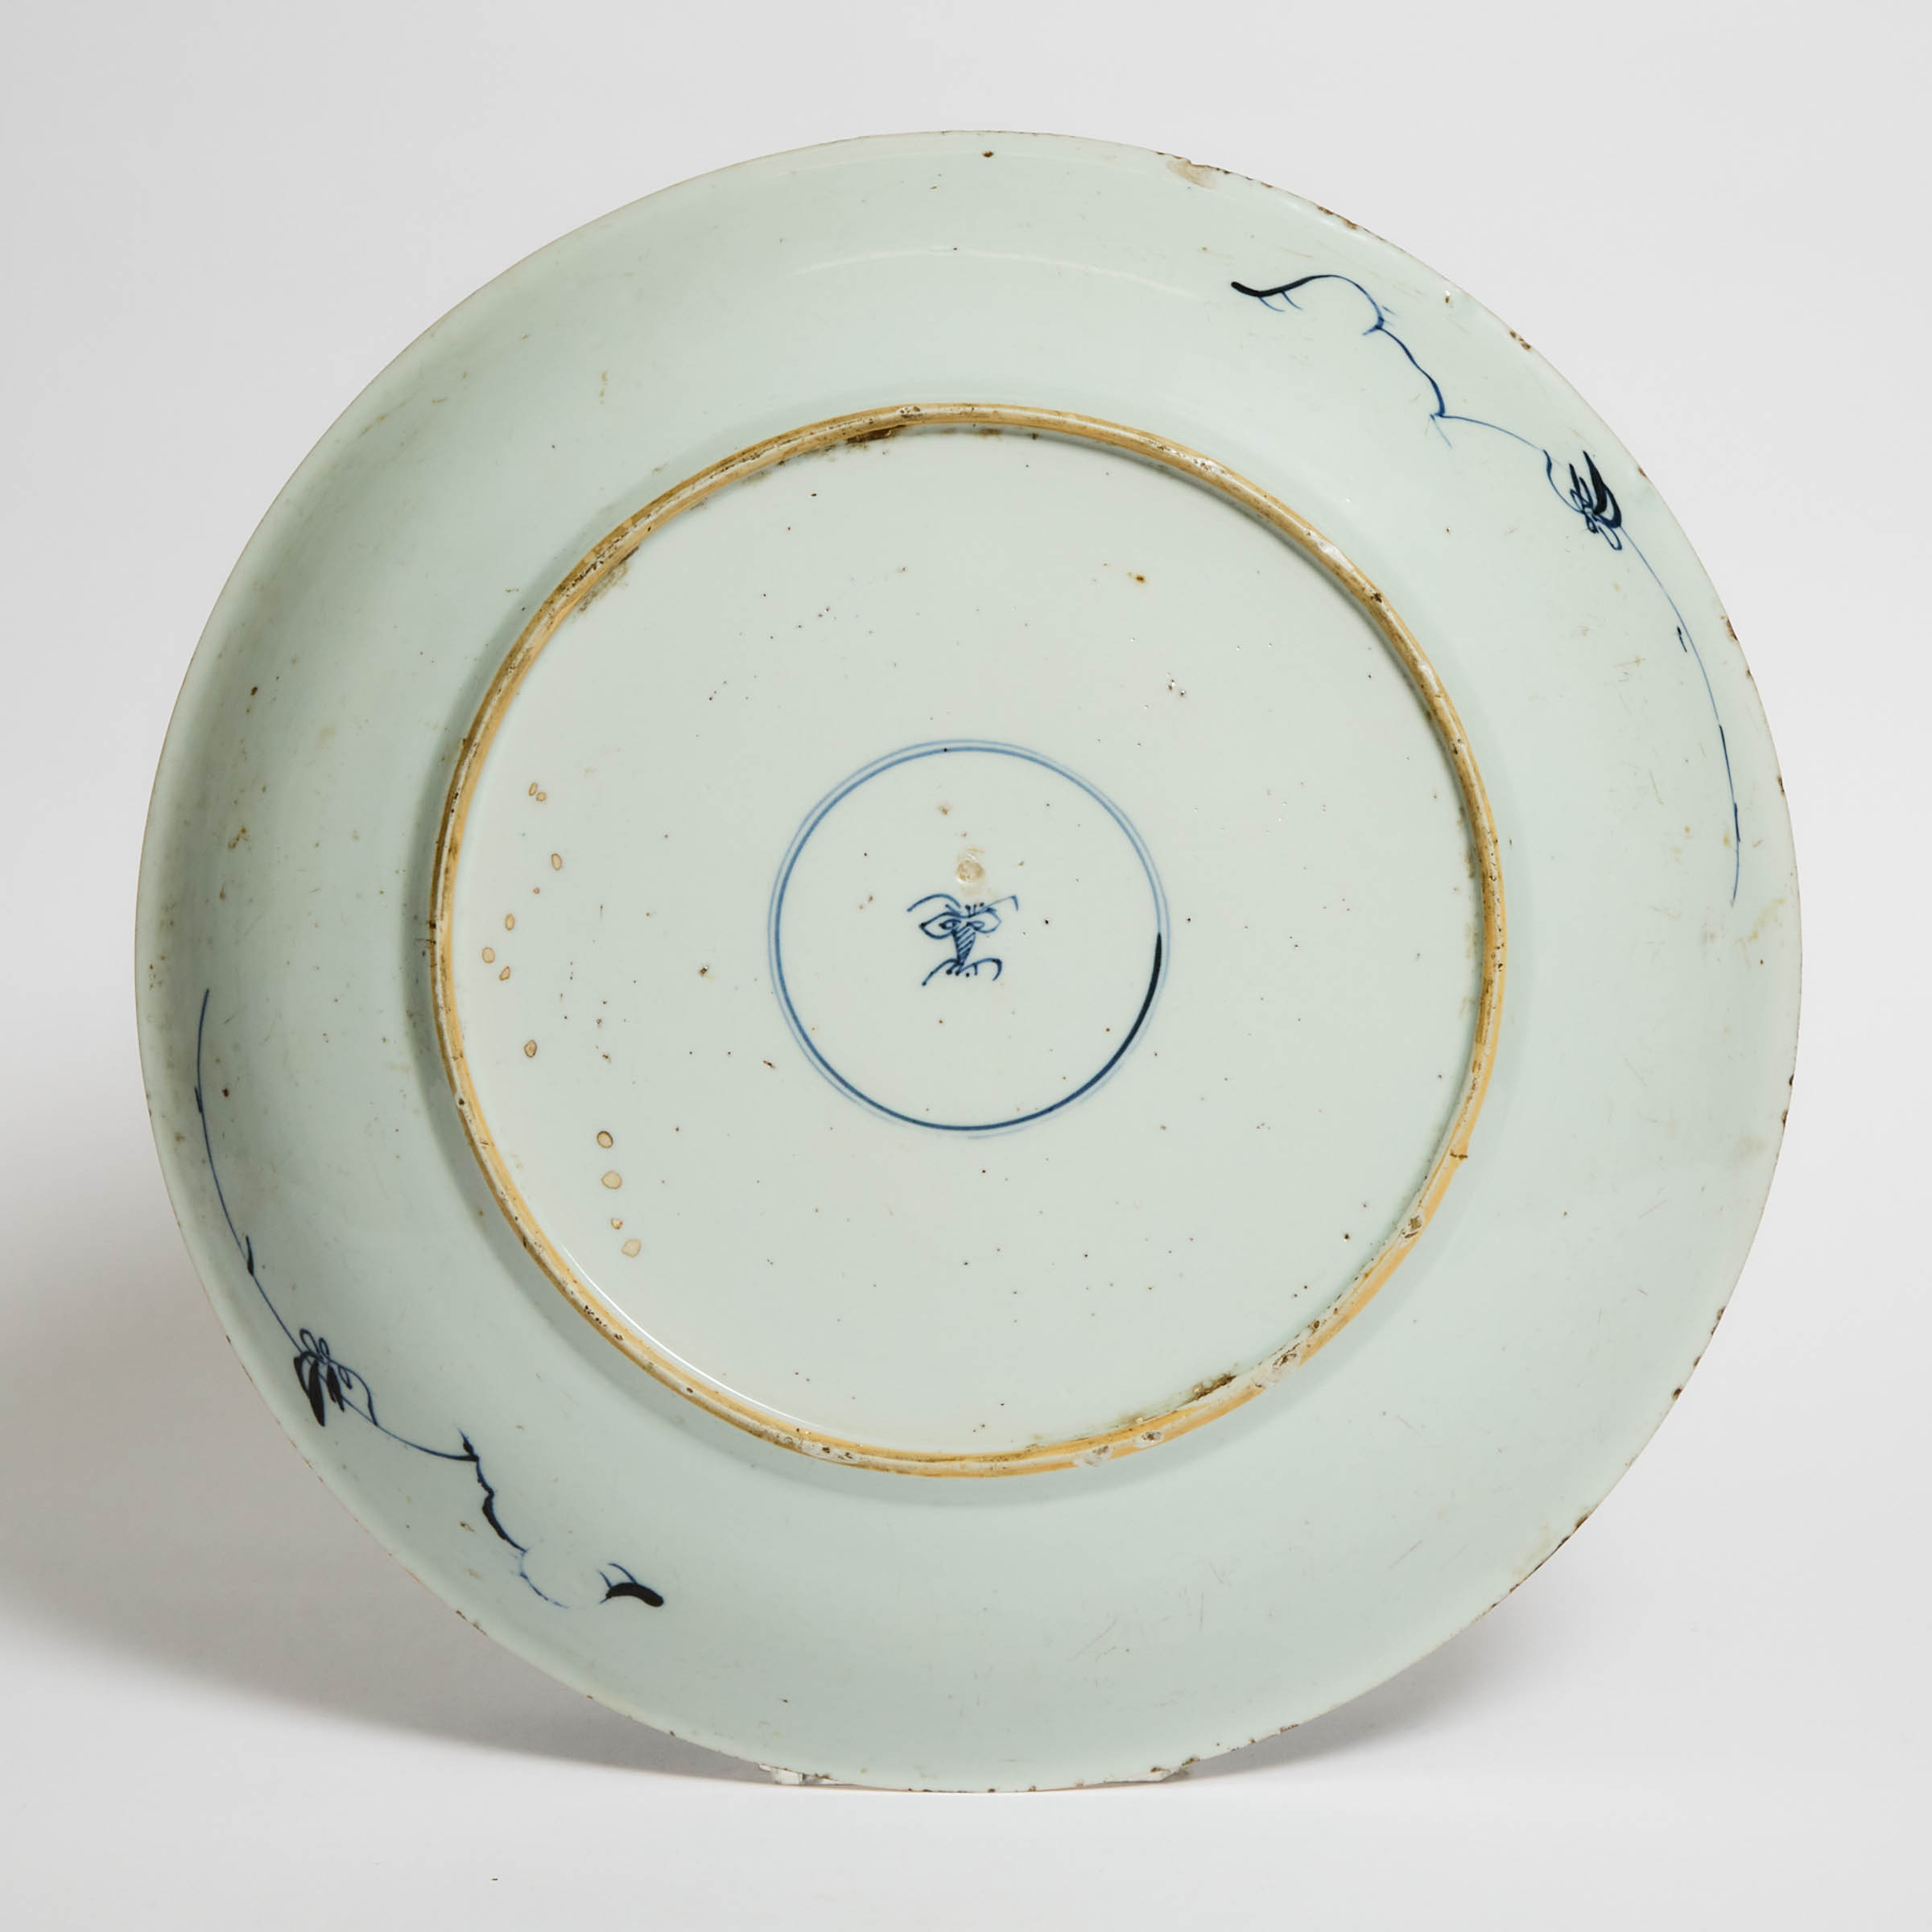 A Blue and White 'Peony' Charger, Kangxi Period (1662-1722)